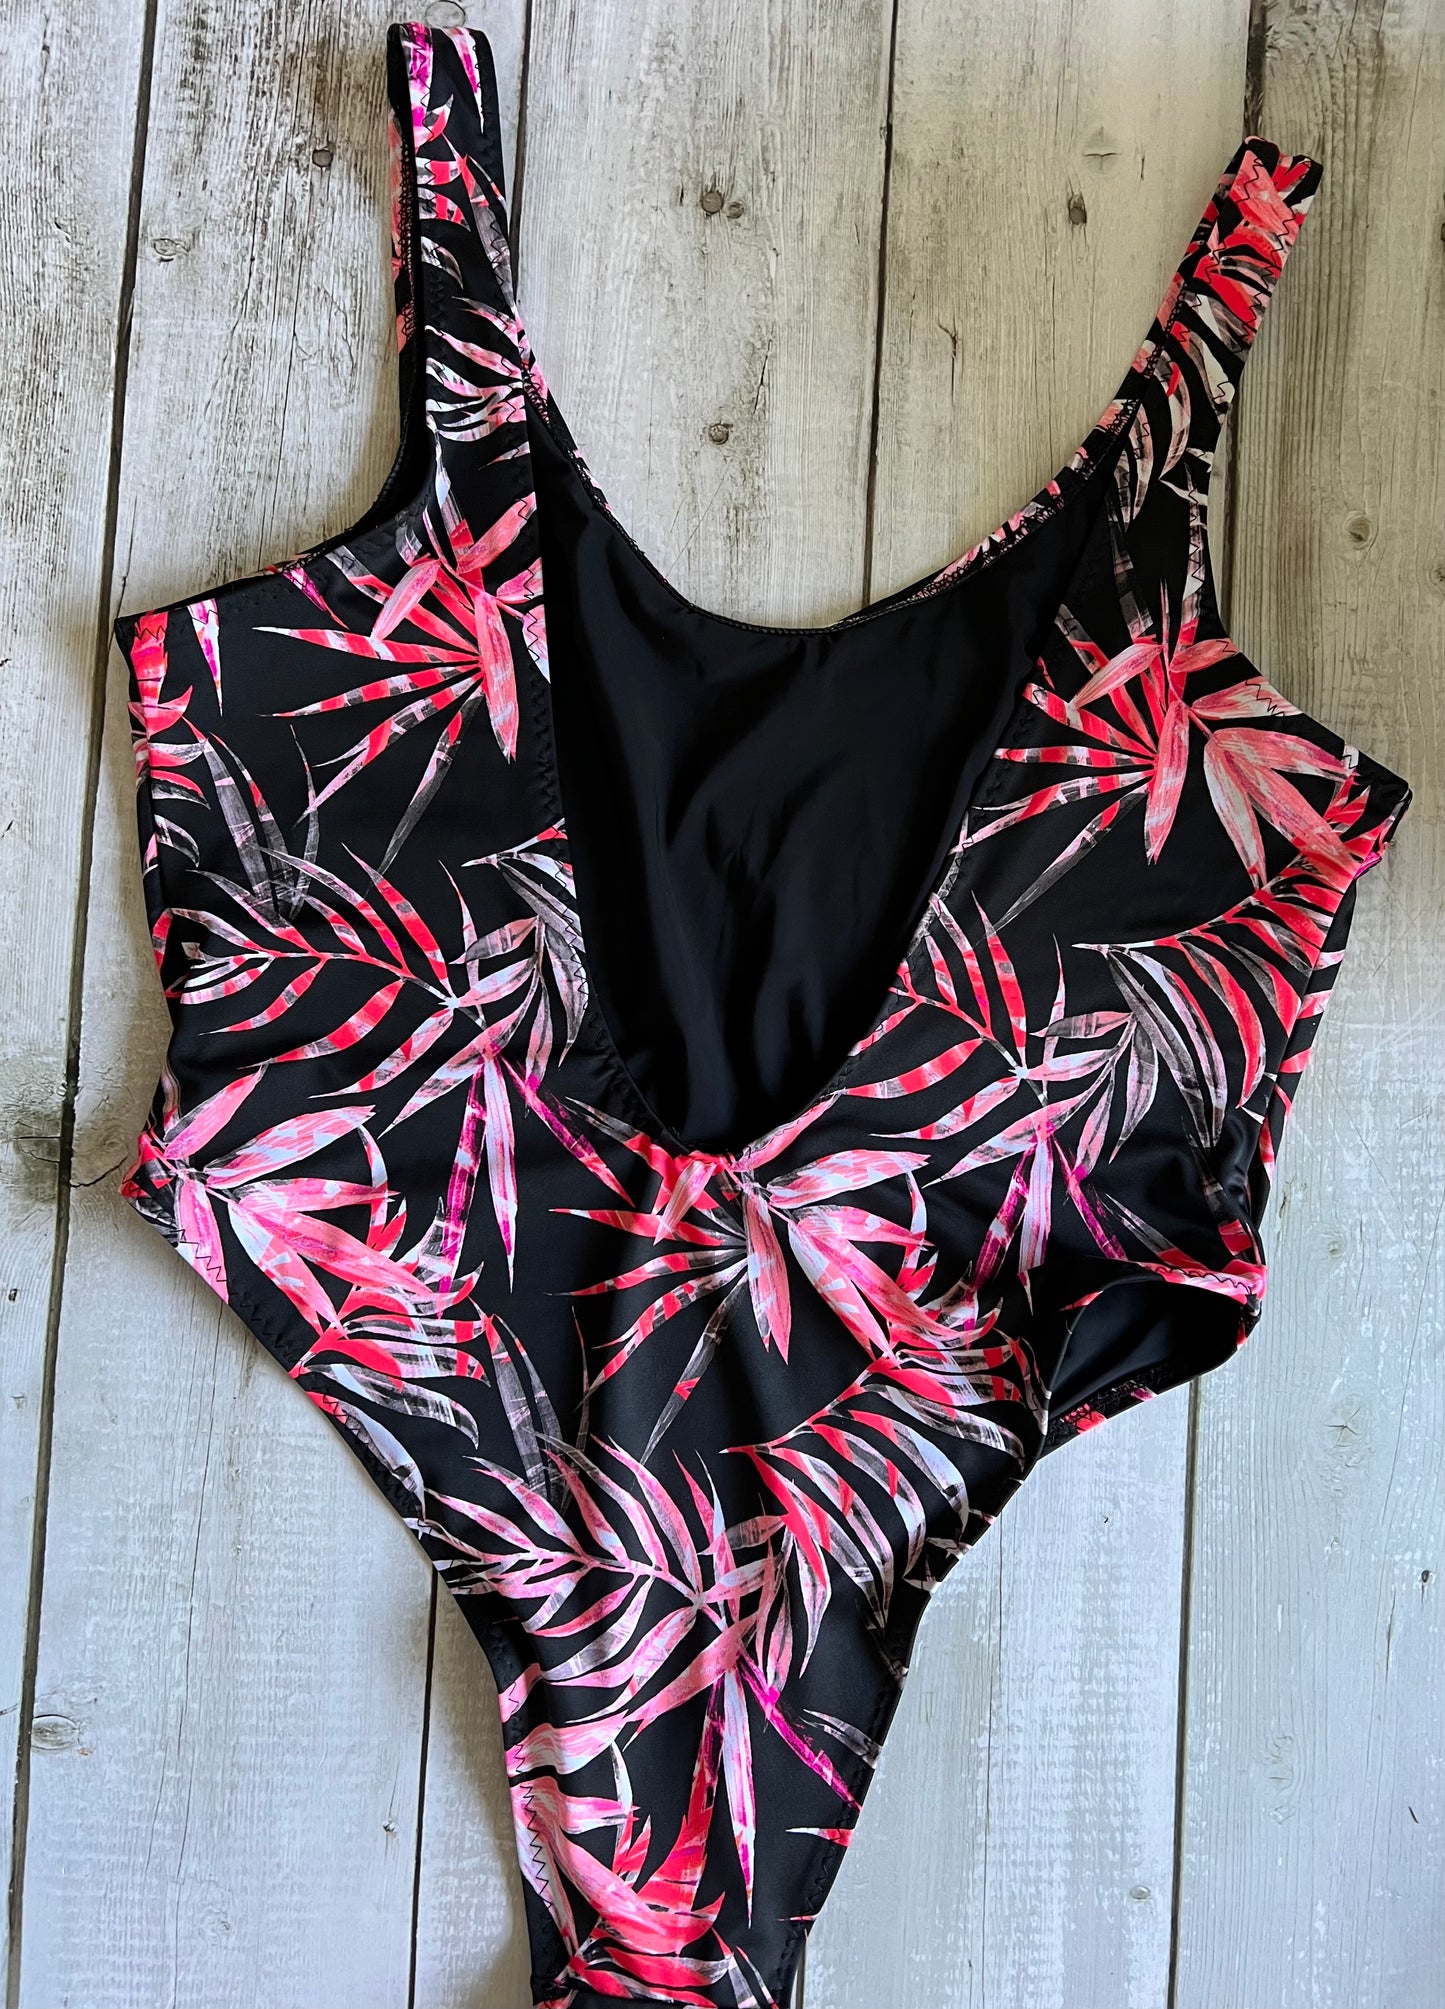 Red Leaf Swimsuit - Size 18